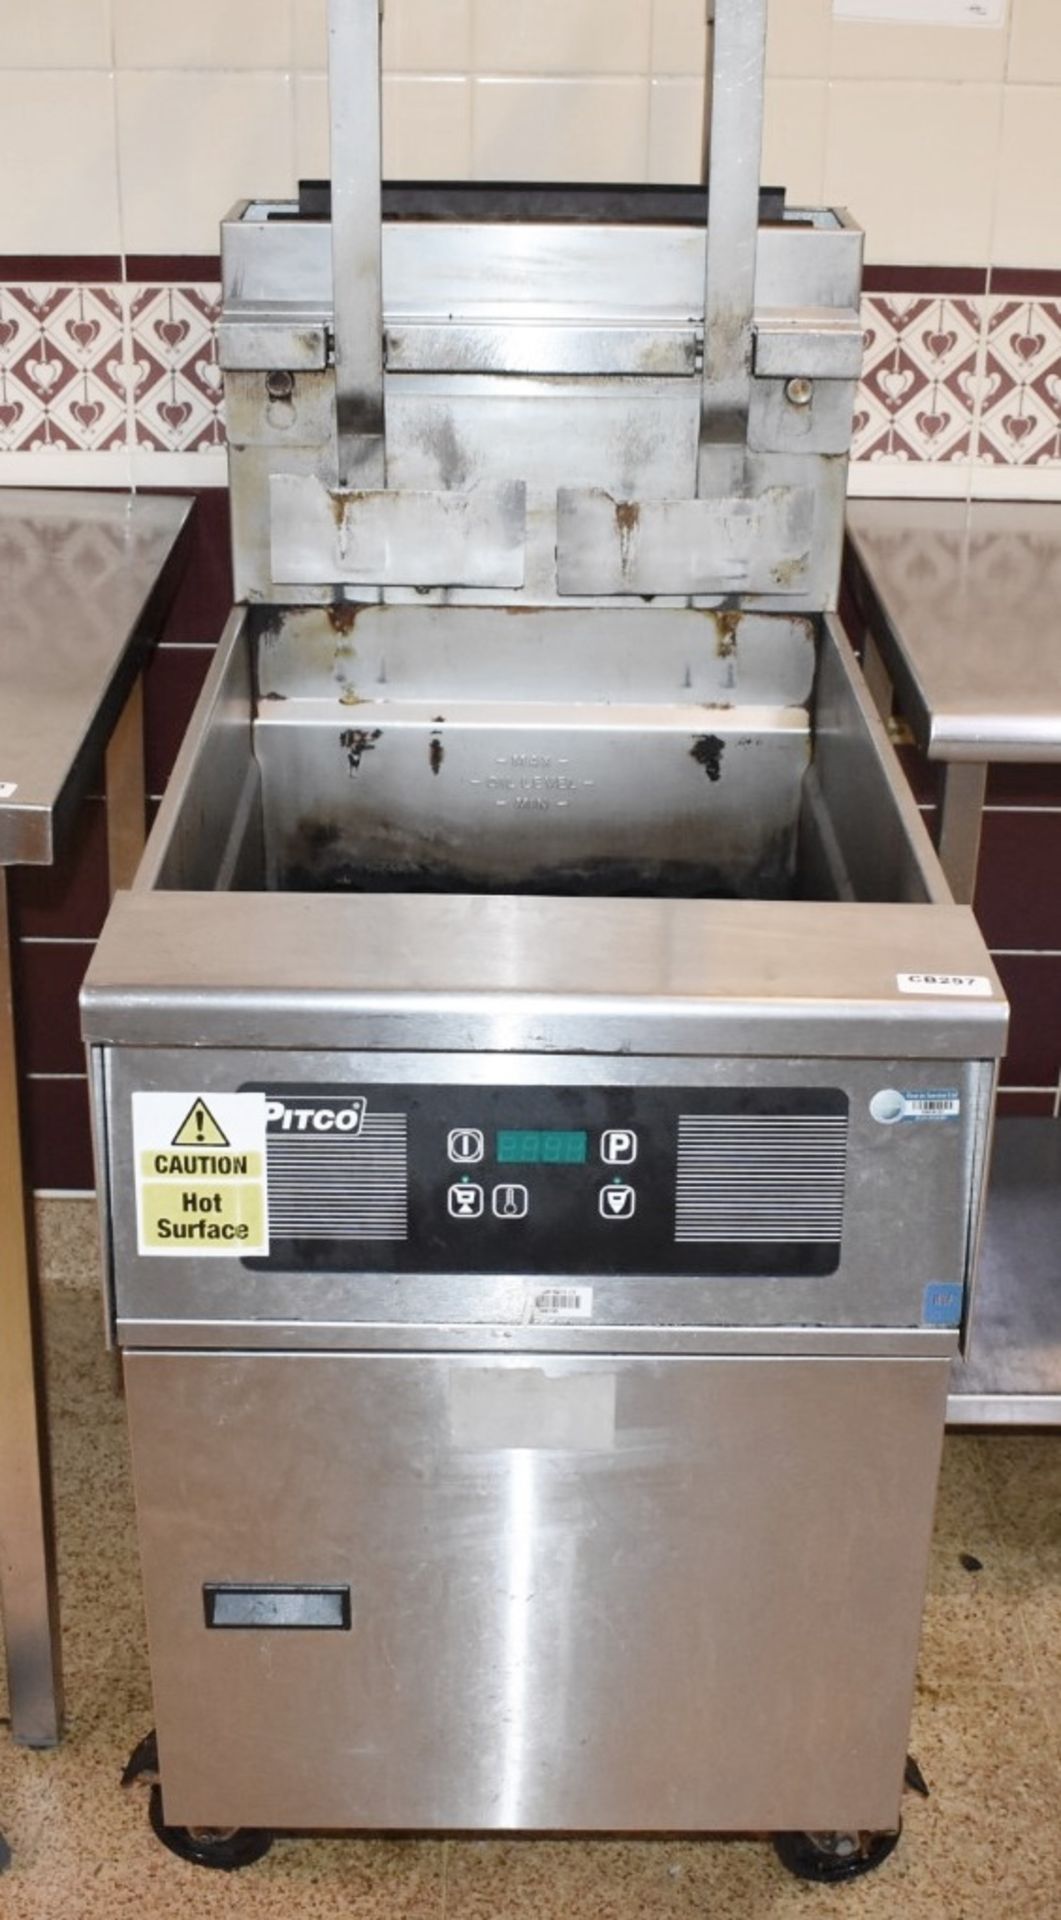 1 x Pifco Frialator Single Basket Gas Fryer With Basket Lifts - Stainless Steel Exterior - Model